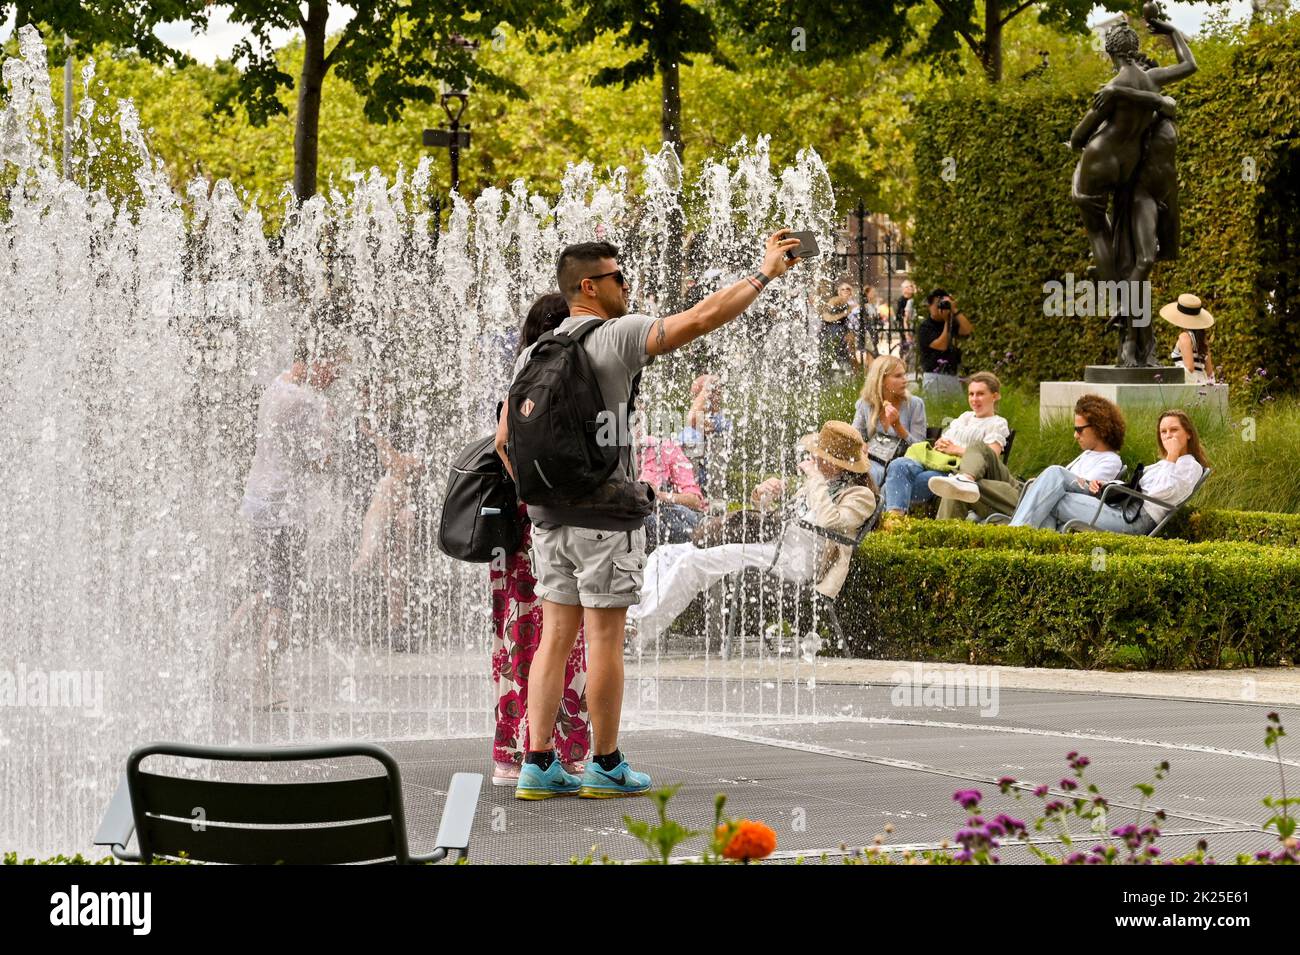 Amsterdam, Netherlands - August 2022: Two people taking a selfie while standing next to a fountain in a public garden Stock Photo